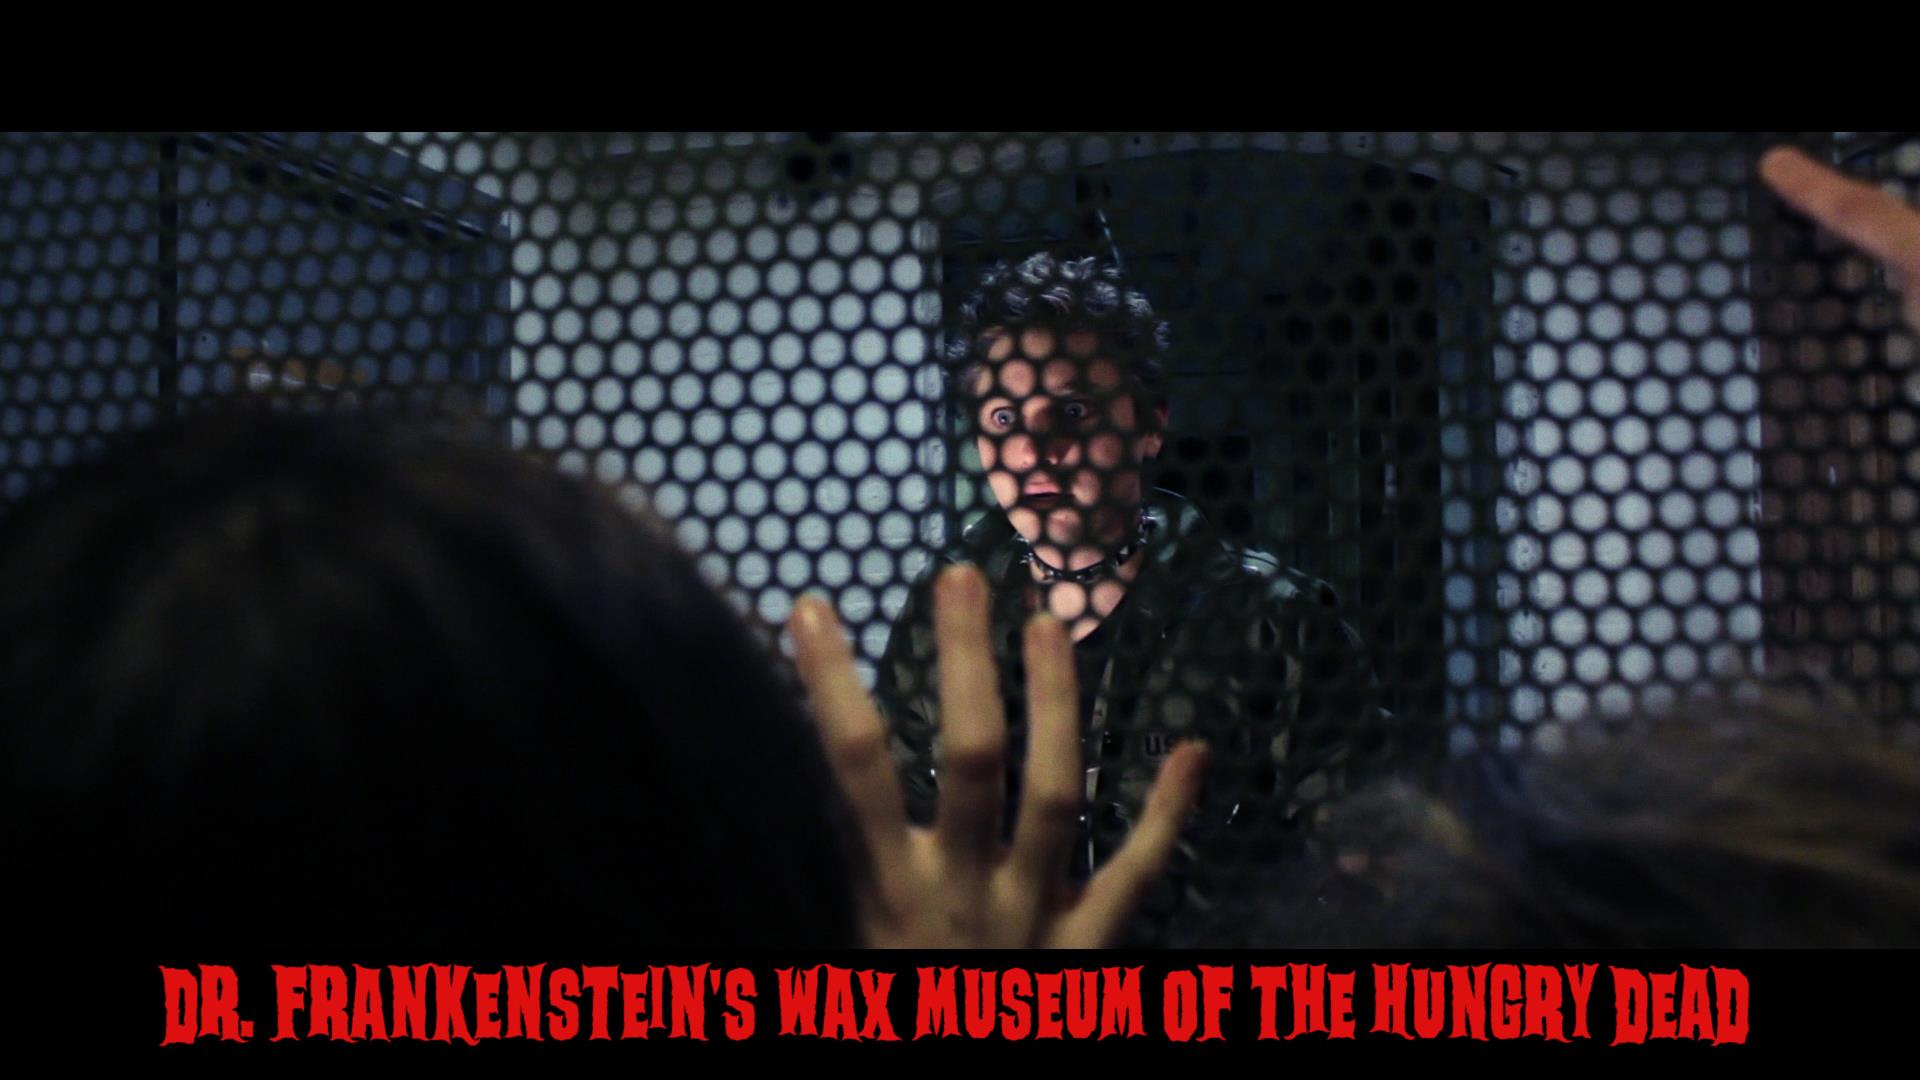 Dr. Frankenstein's Wax Museum of the Hungry Dead